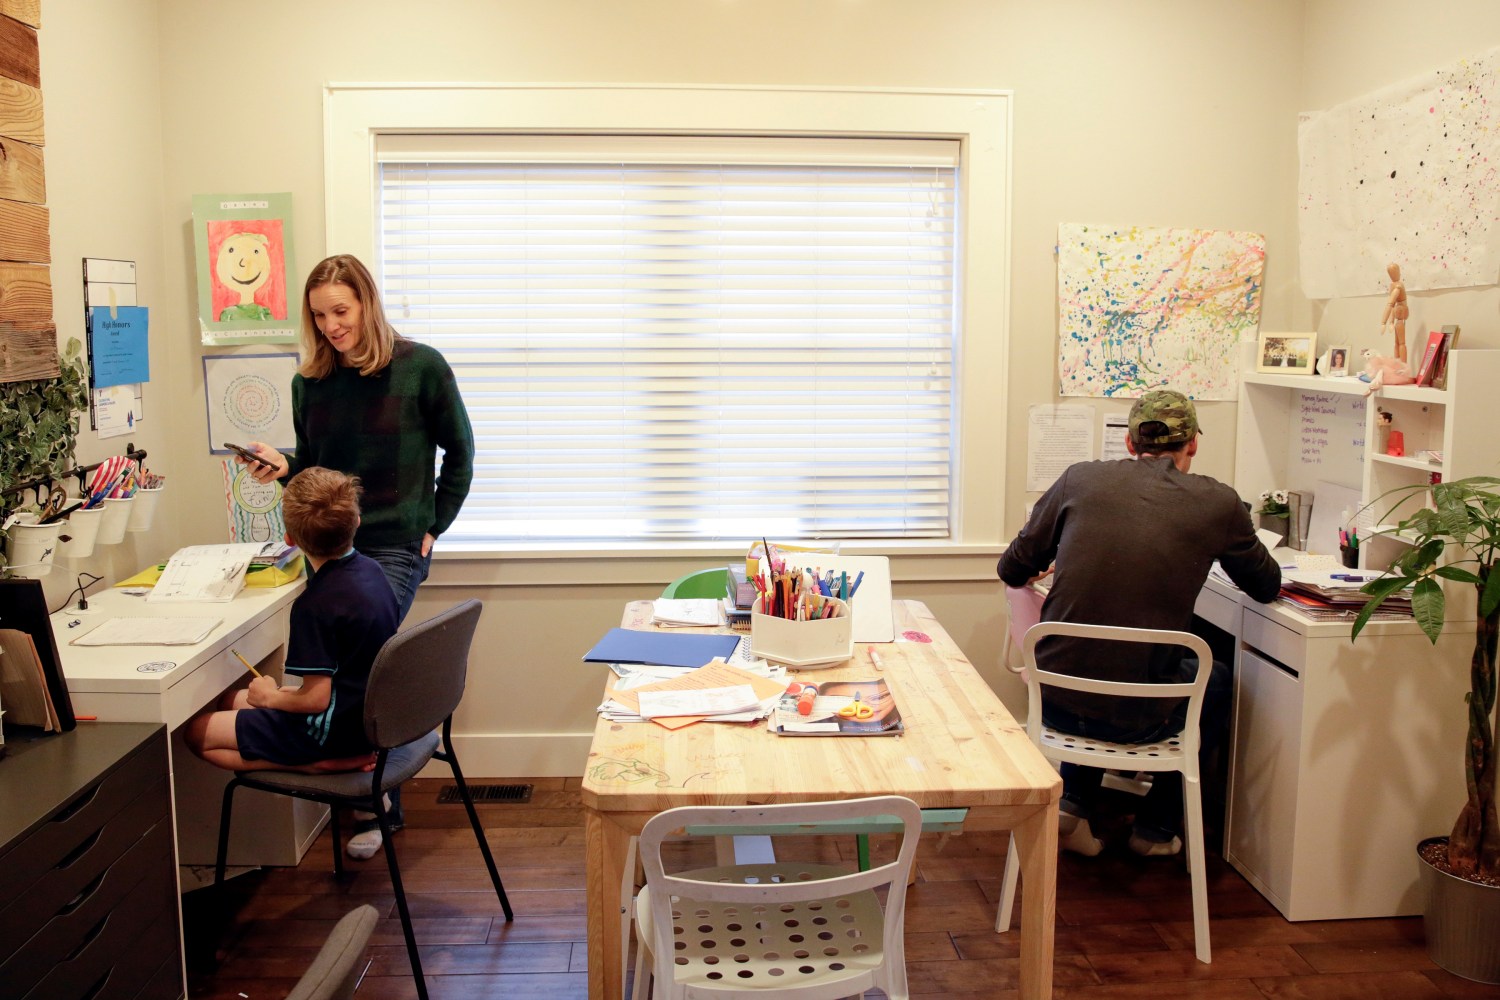 Helen and Tyler McClenahan help their kids with school work at home during Washington Governor's "stay home, stay healthy" initiative as efforts continue to help slow the spread of coronavirus disease (COVID-19) in Seattle, Washington, U.S. March 27, 2020.  REUTERS/Jason Redmond